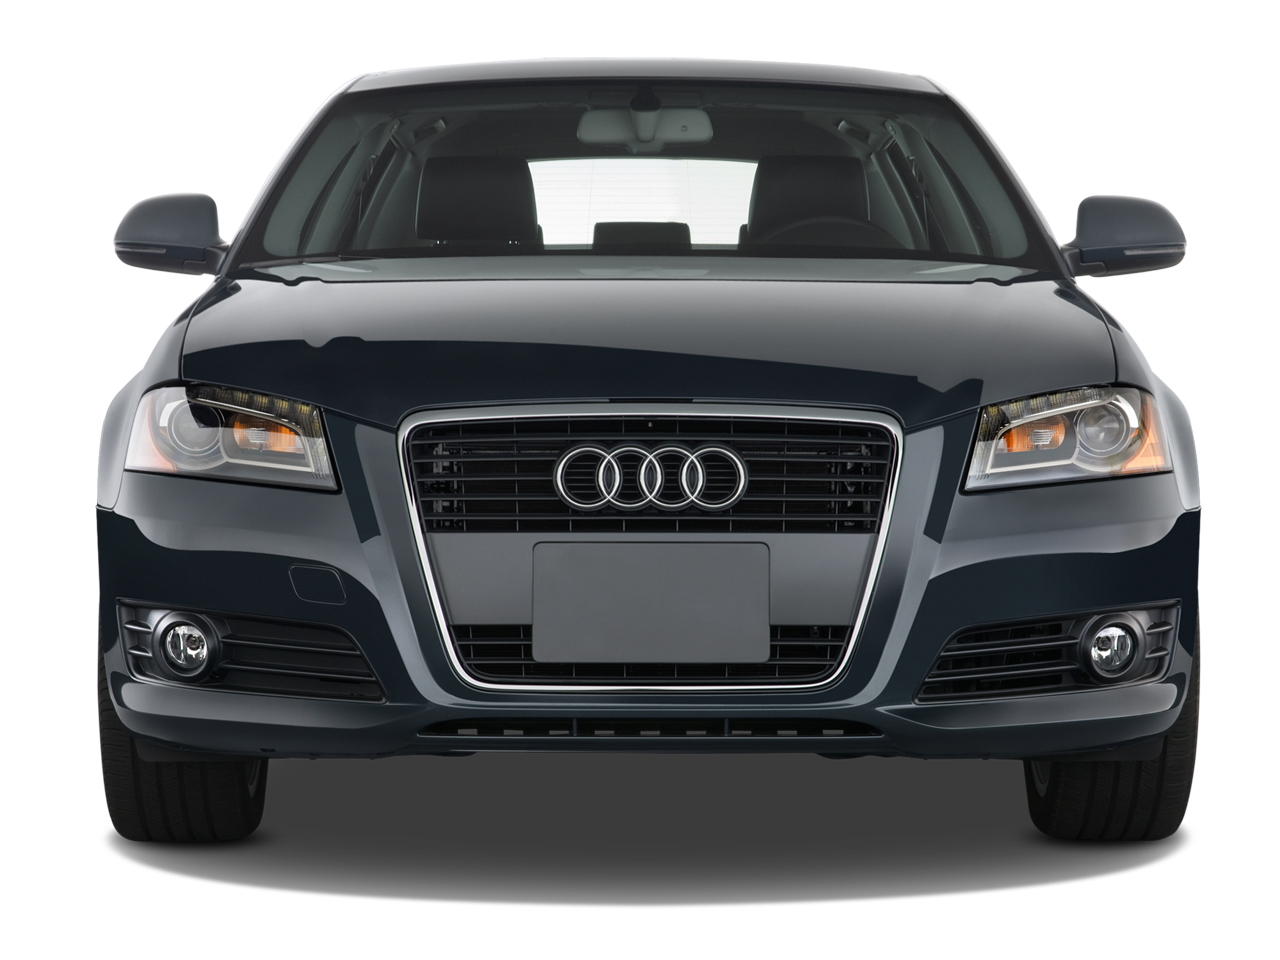 2013 Audi A3 Review, Ratings, Specs, Prices, and Photos - The Car Connection